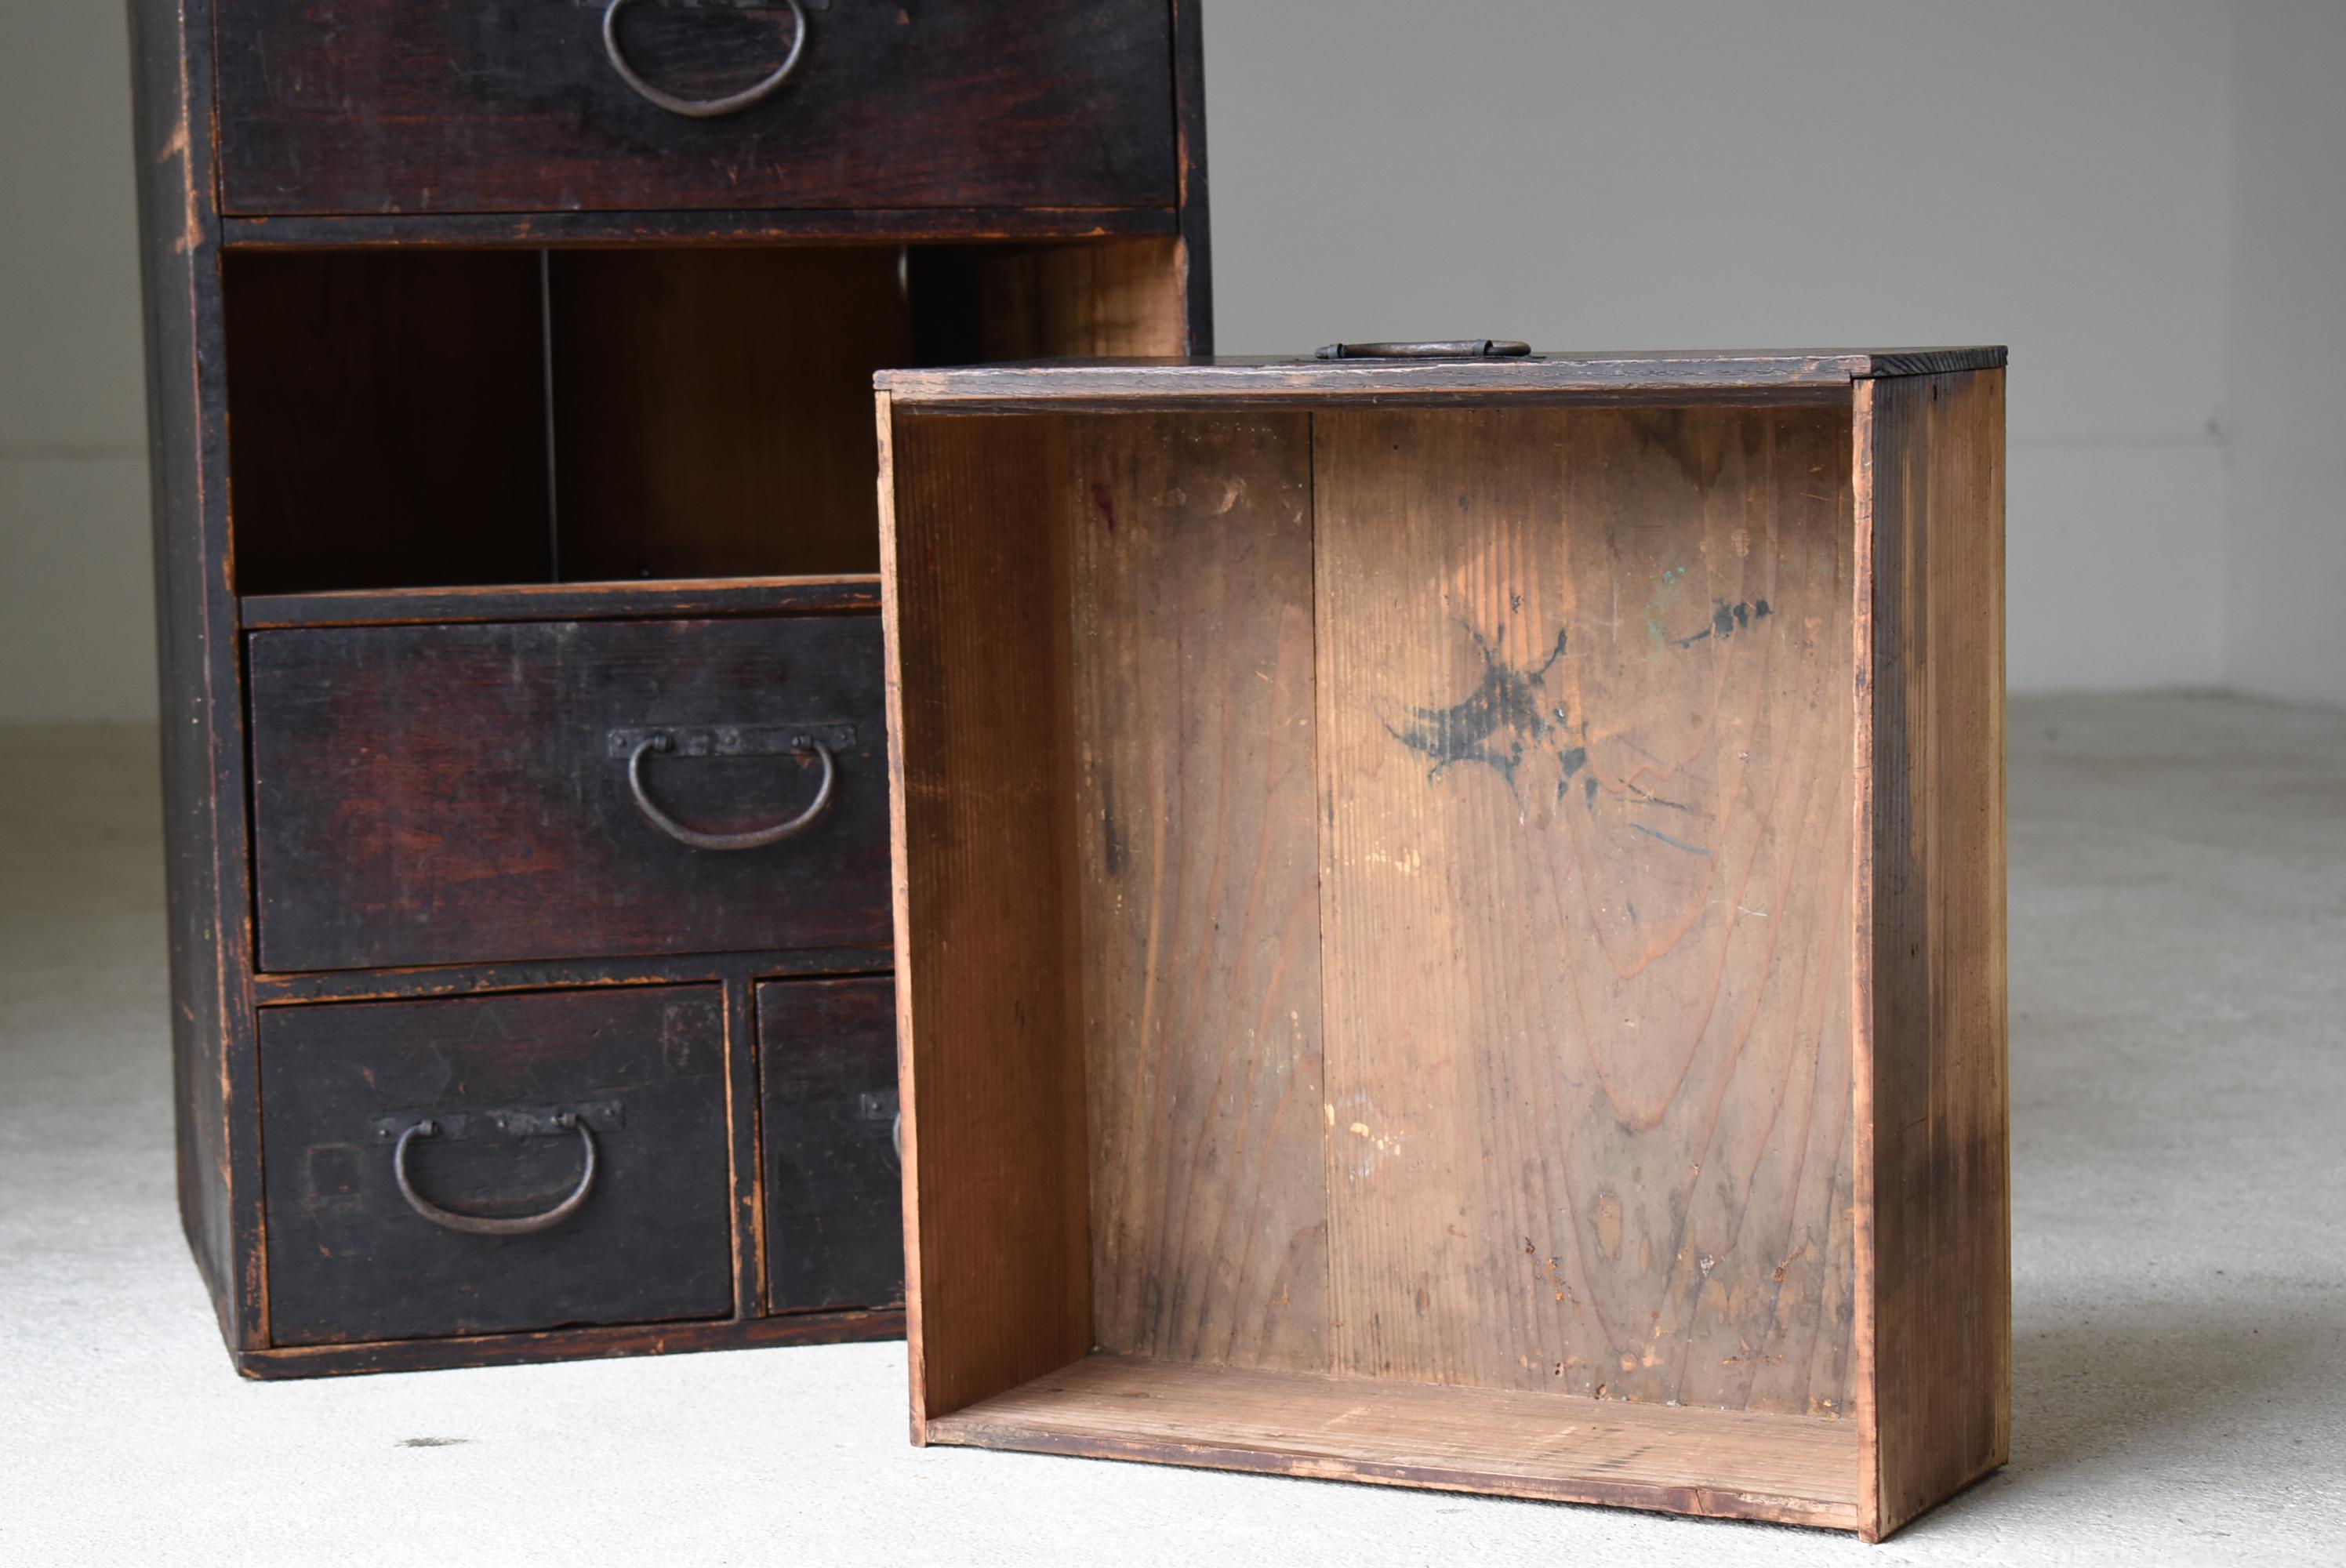 Japanese Antique Chests of Drawers 1860s-1900s /Tansu Storage Mingei Cabinet 4